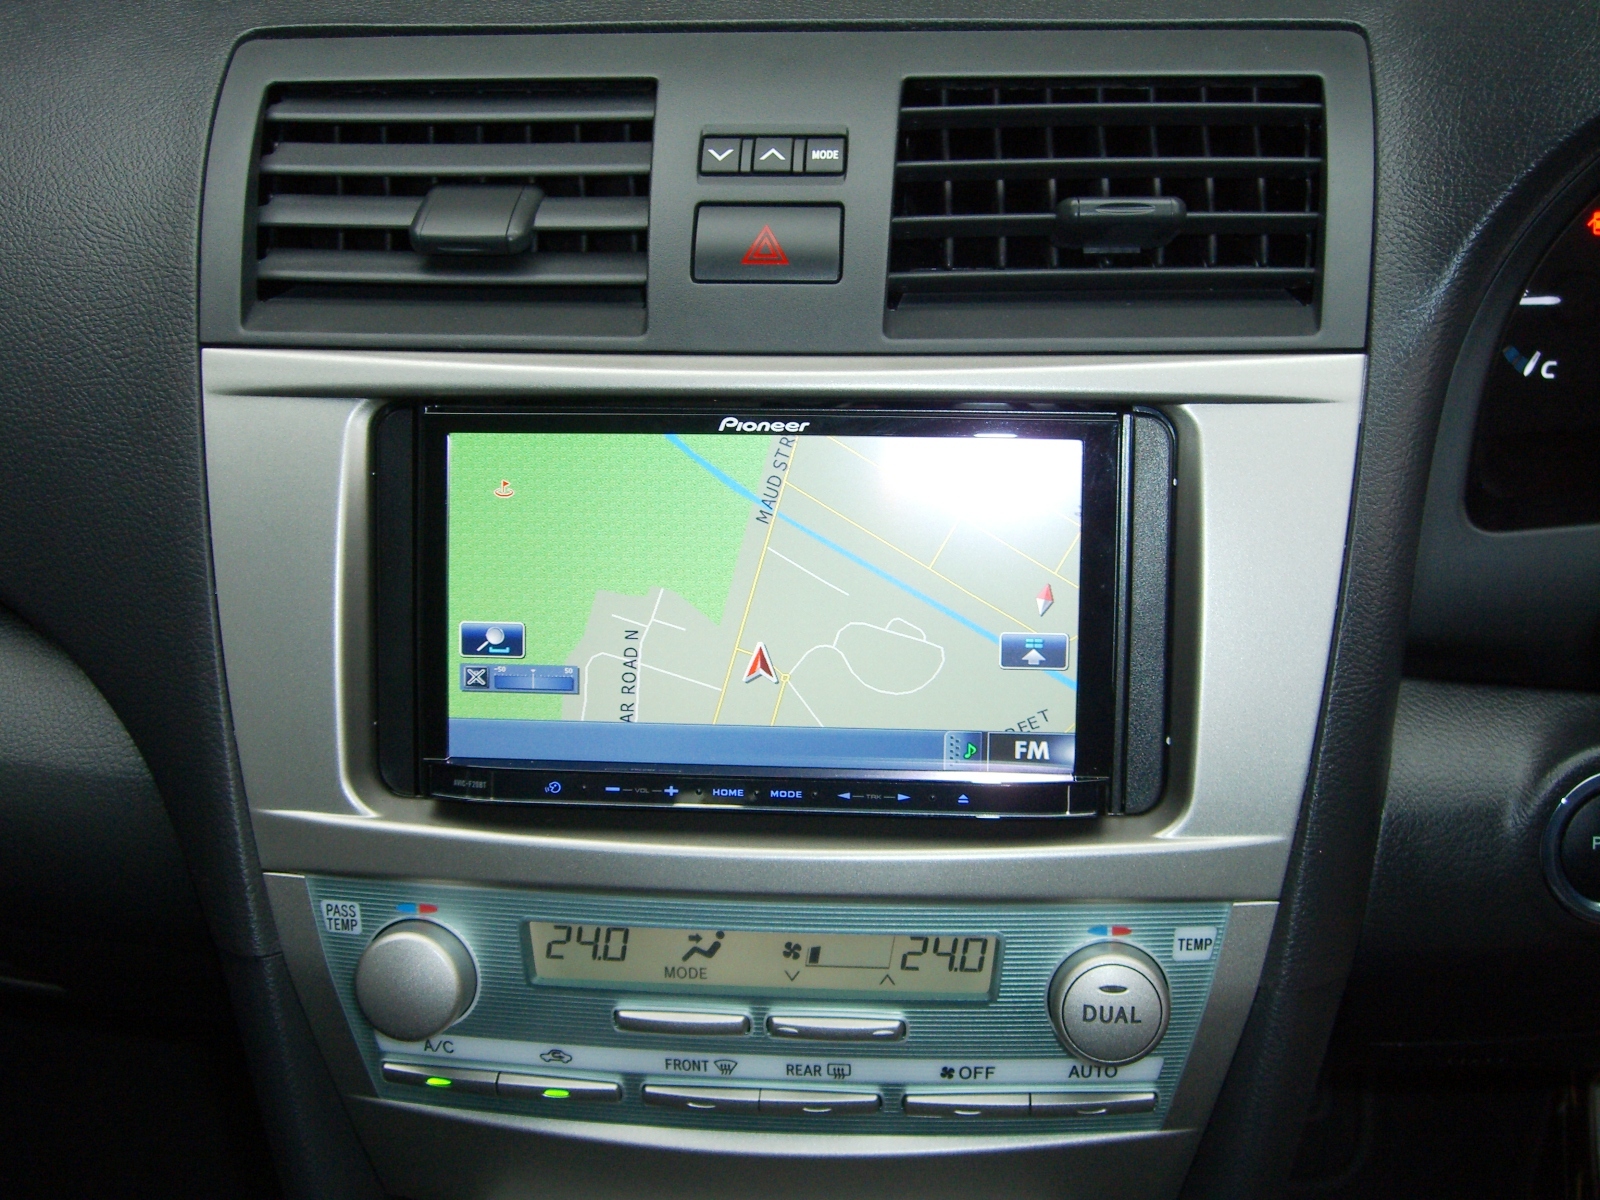 Toyota Aurion Pioneer DVD GPS Navigation and reverse camera